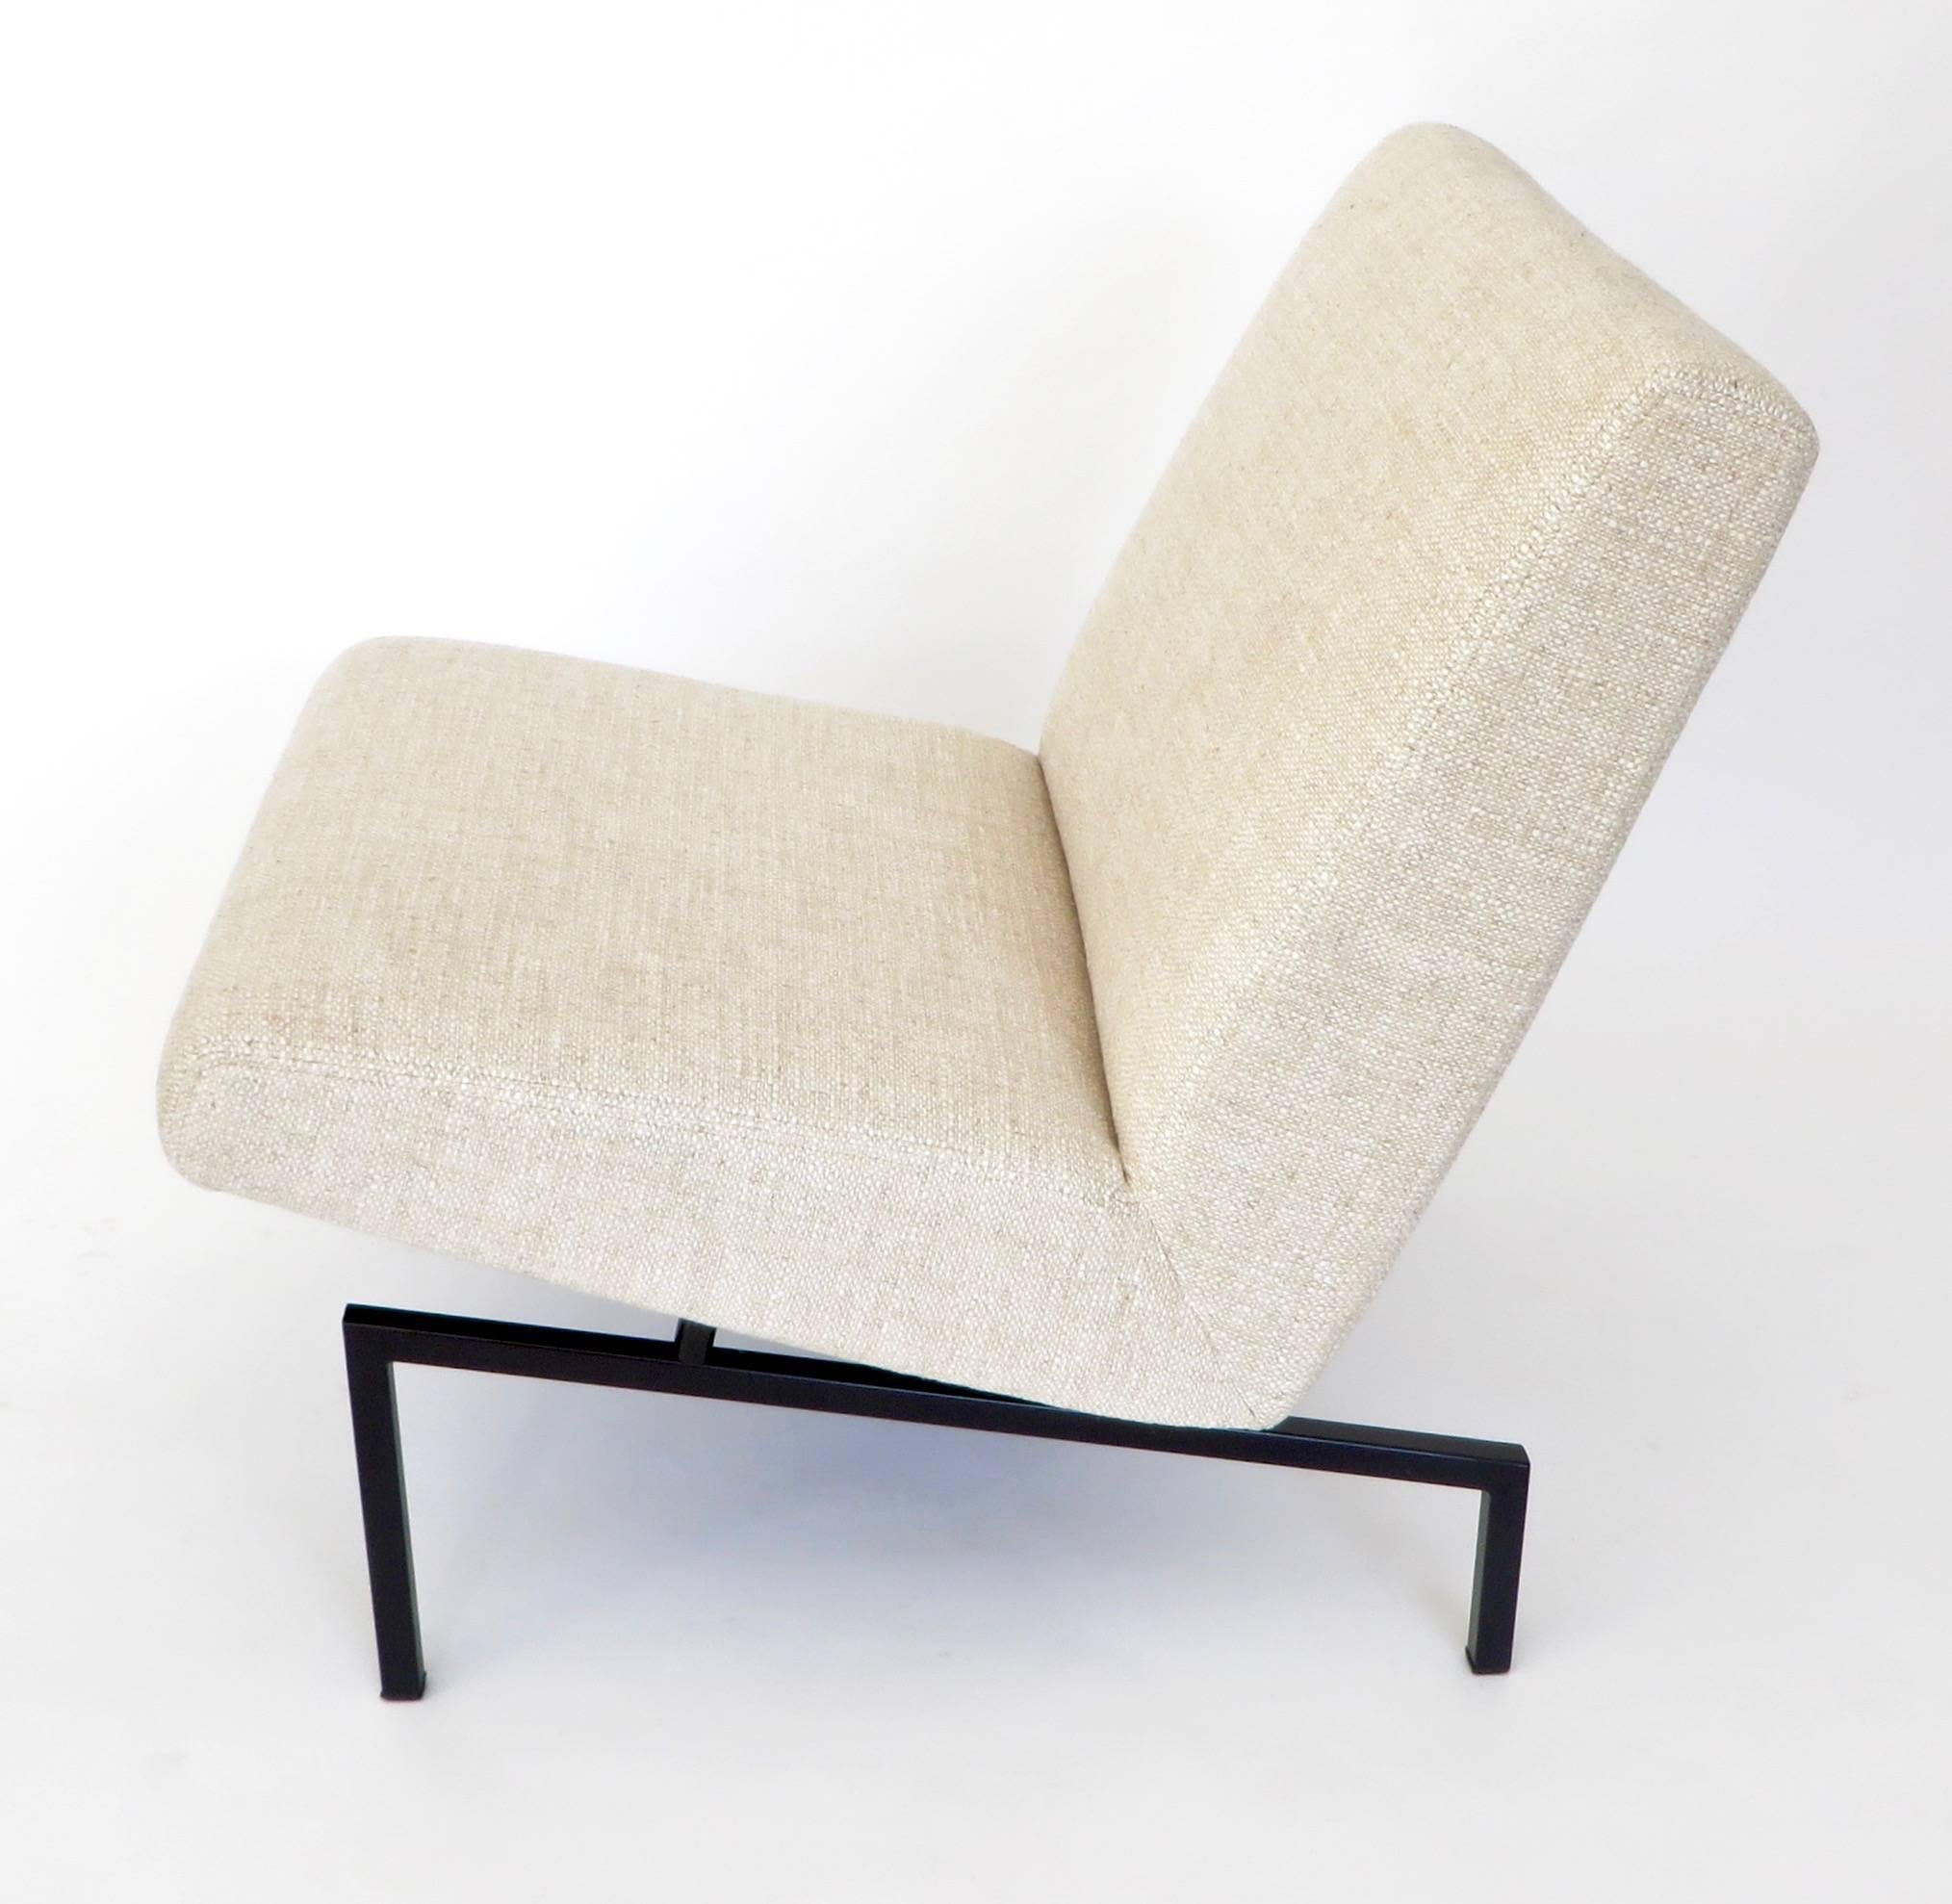 Minimalist, with elegant proportion, the tempo lounge chairs were designed by Joseph Andre Motte and editioned by Steiner. Metal tag on one chair.
Restored cushions and completely reupholstered in nubby oatmeal linen.
Measures: Overall size: 22.5